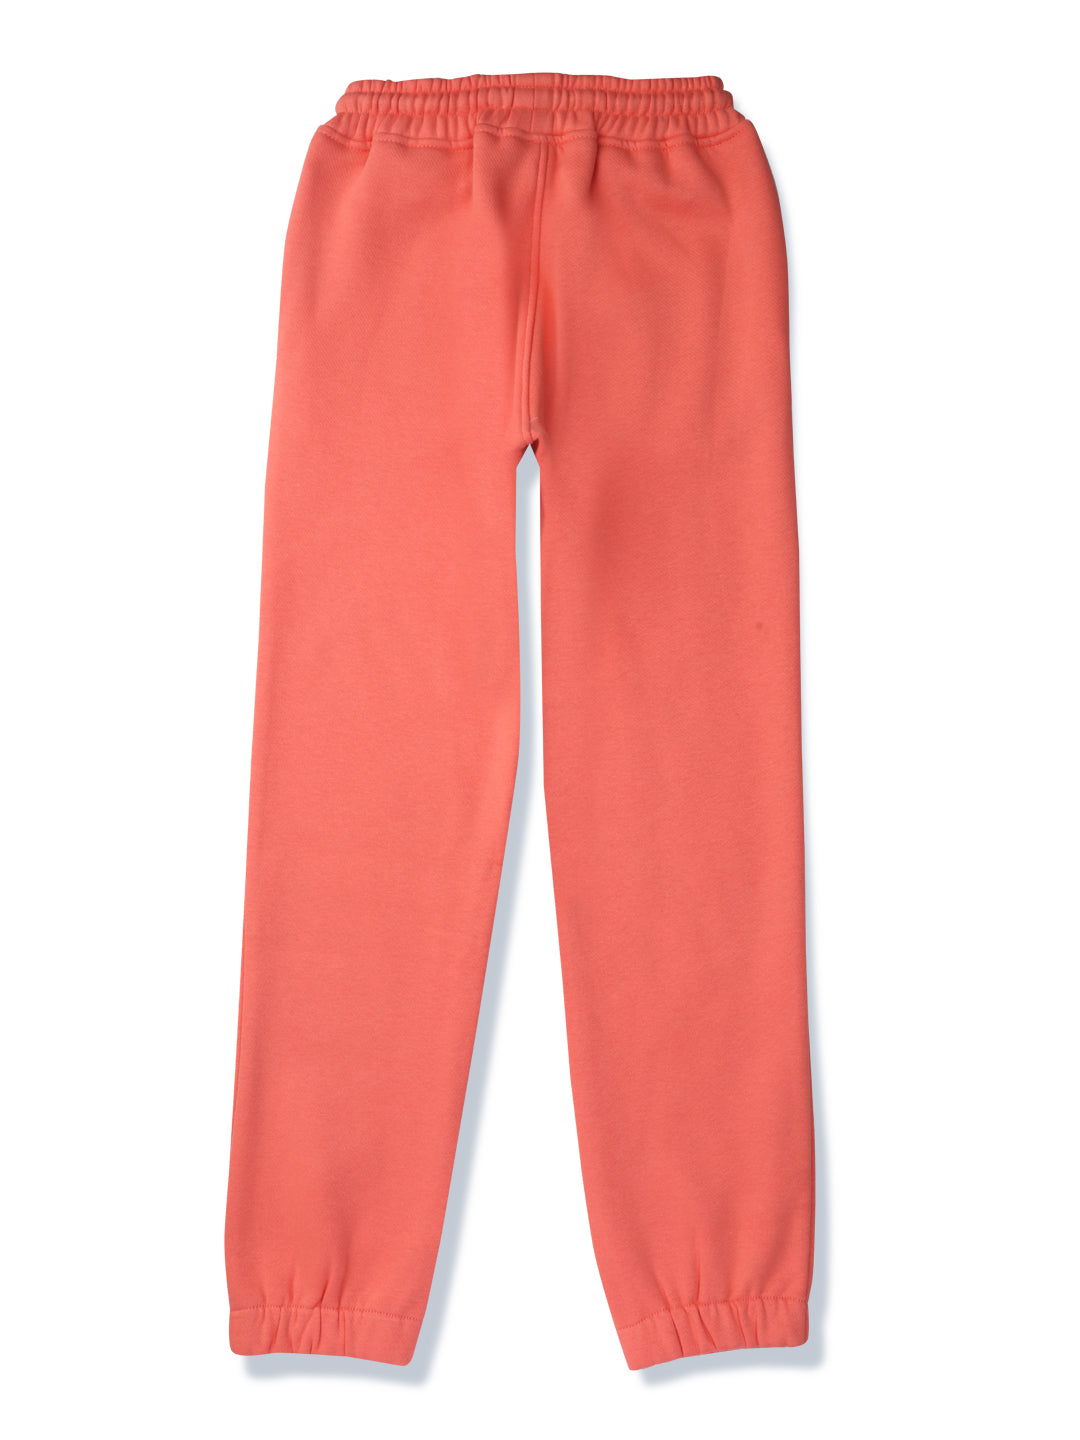 Girls Pink Solid Cotton Track Pant